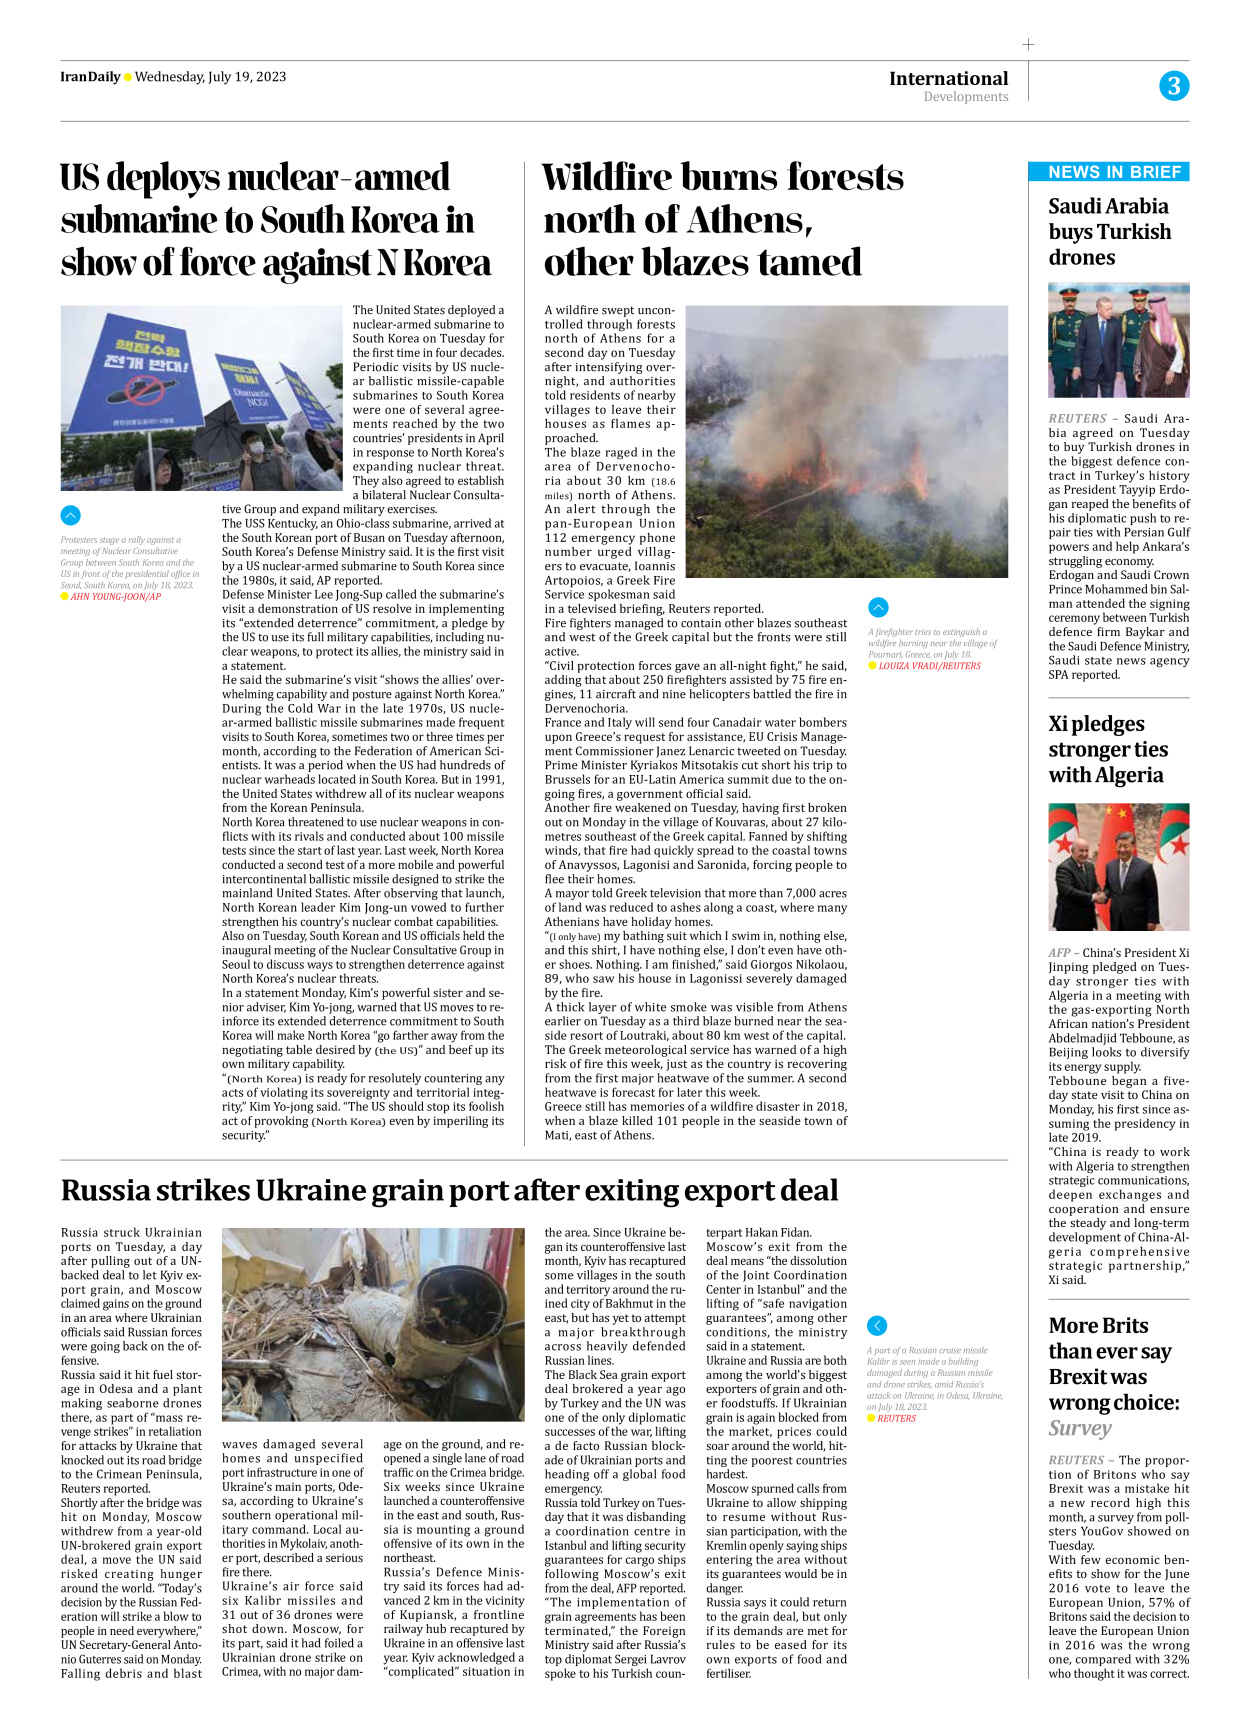 Iran Daily - Number Seven Thousand Three Hundred and Forty Three - 19 July 2023 - Page 3